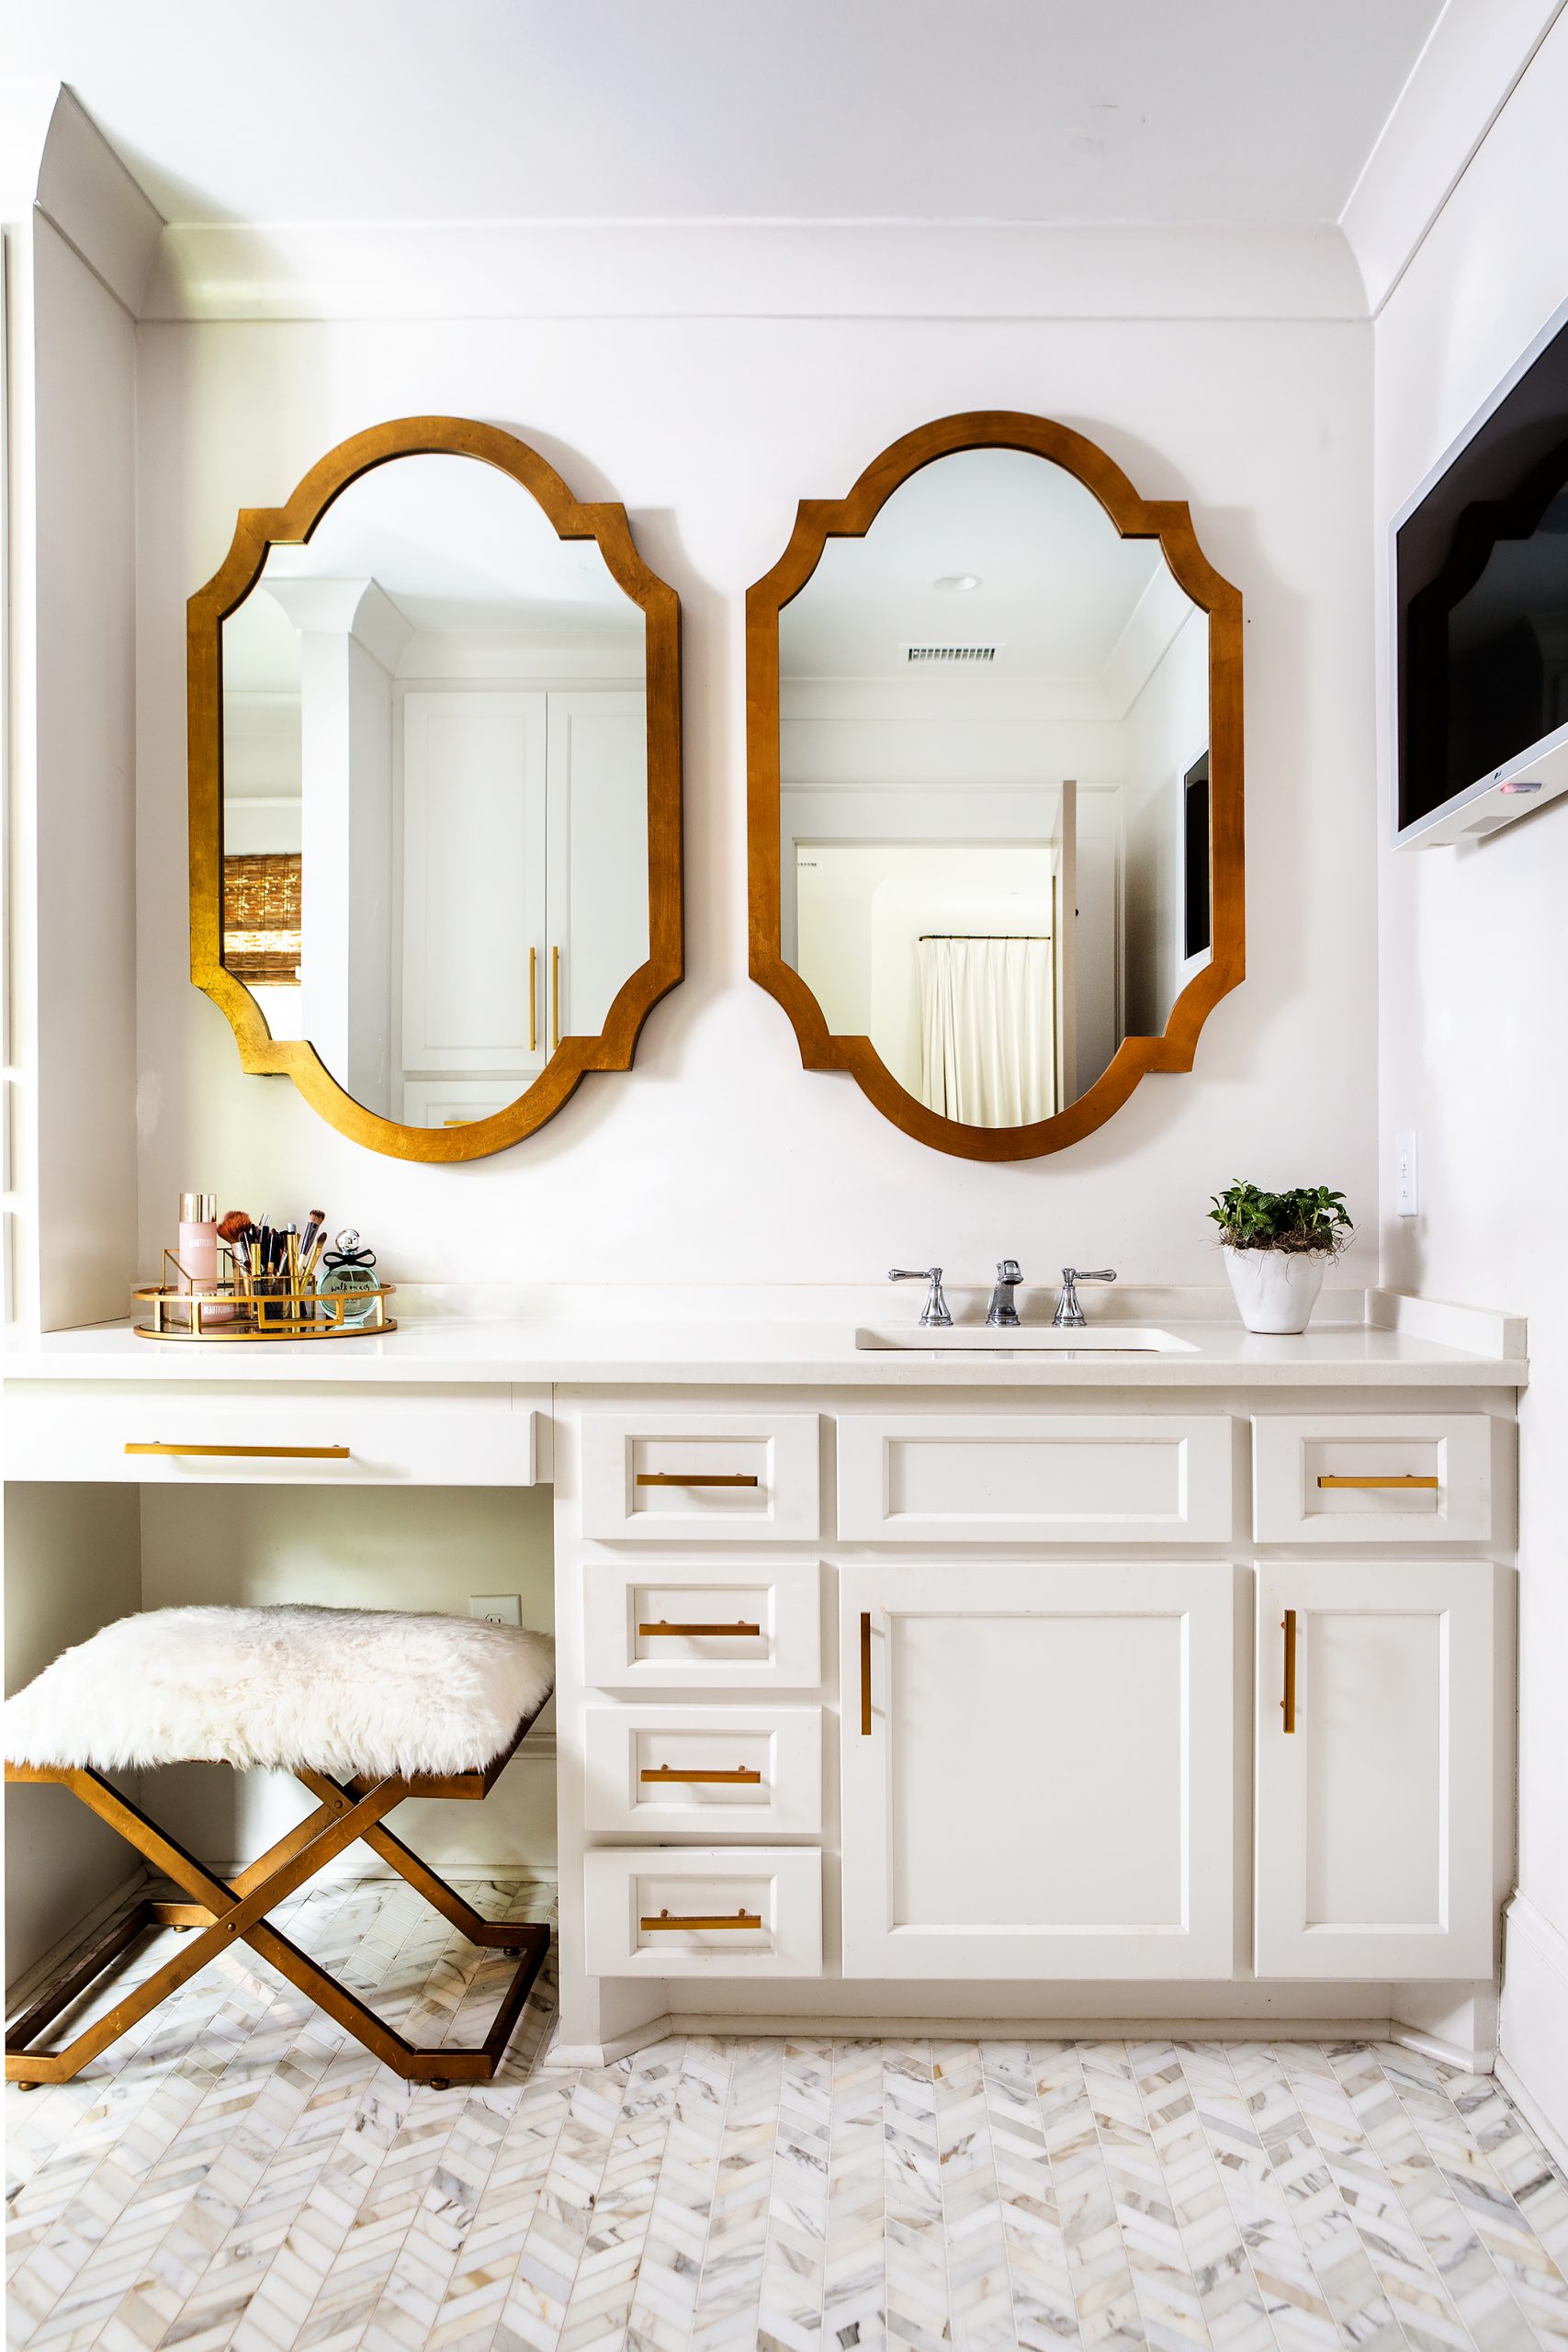 Top left: An addition houses the couple’s spacious new bedroom and his-and-her baths and closets.  Wendi’s bath is glamorous while being functional, with marble from Marble and Granite Creations and floor tile selected by Cathrine Reynolds at Palmetto Tile.